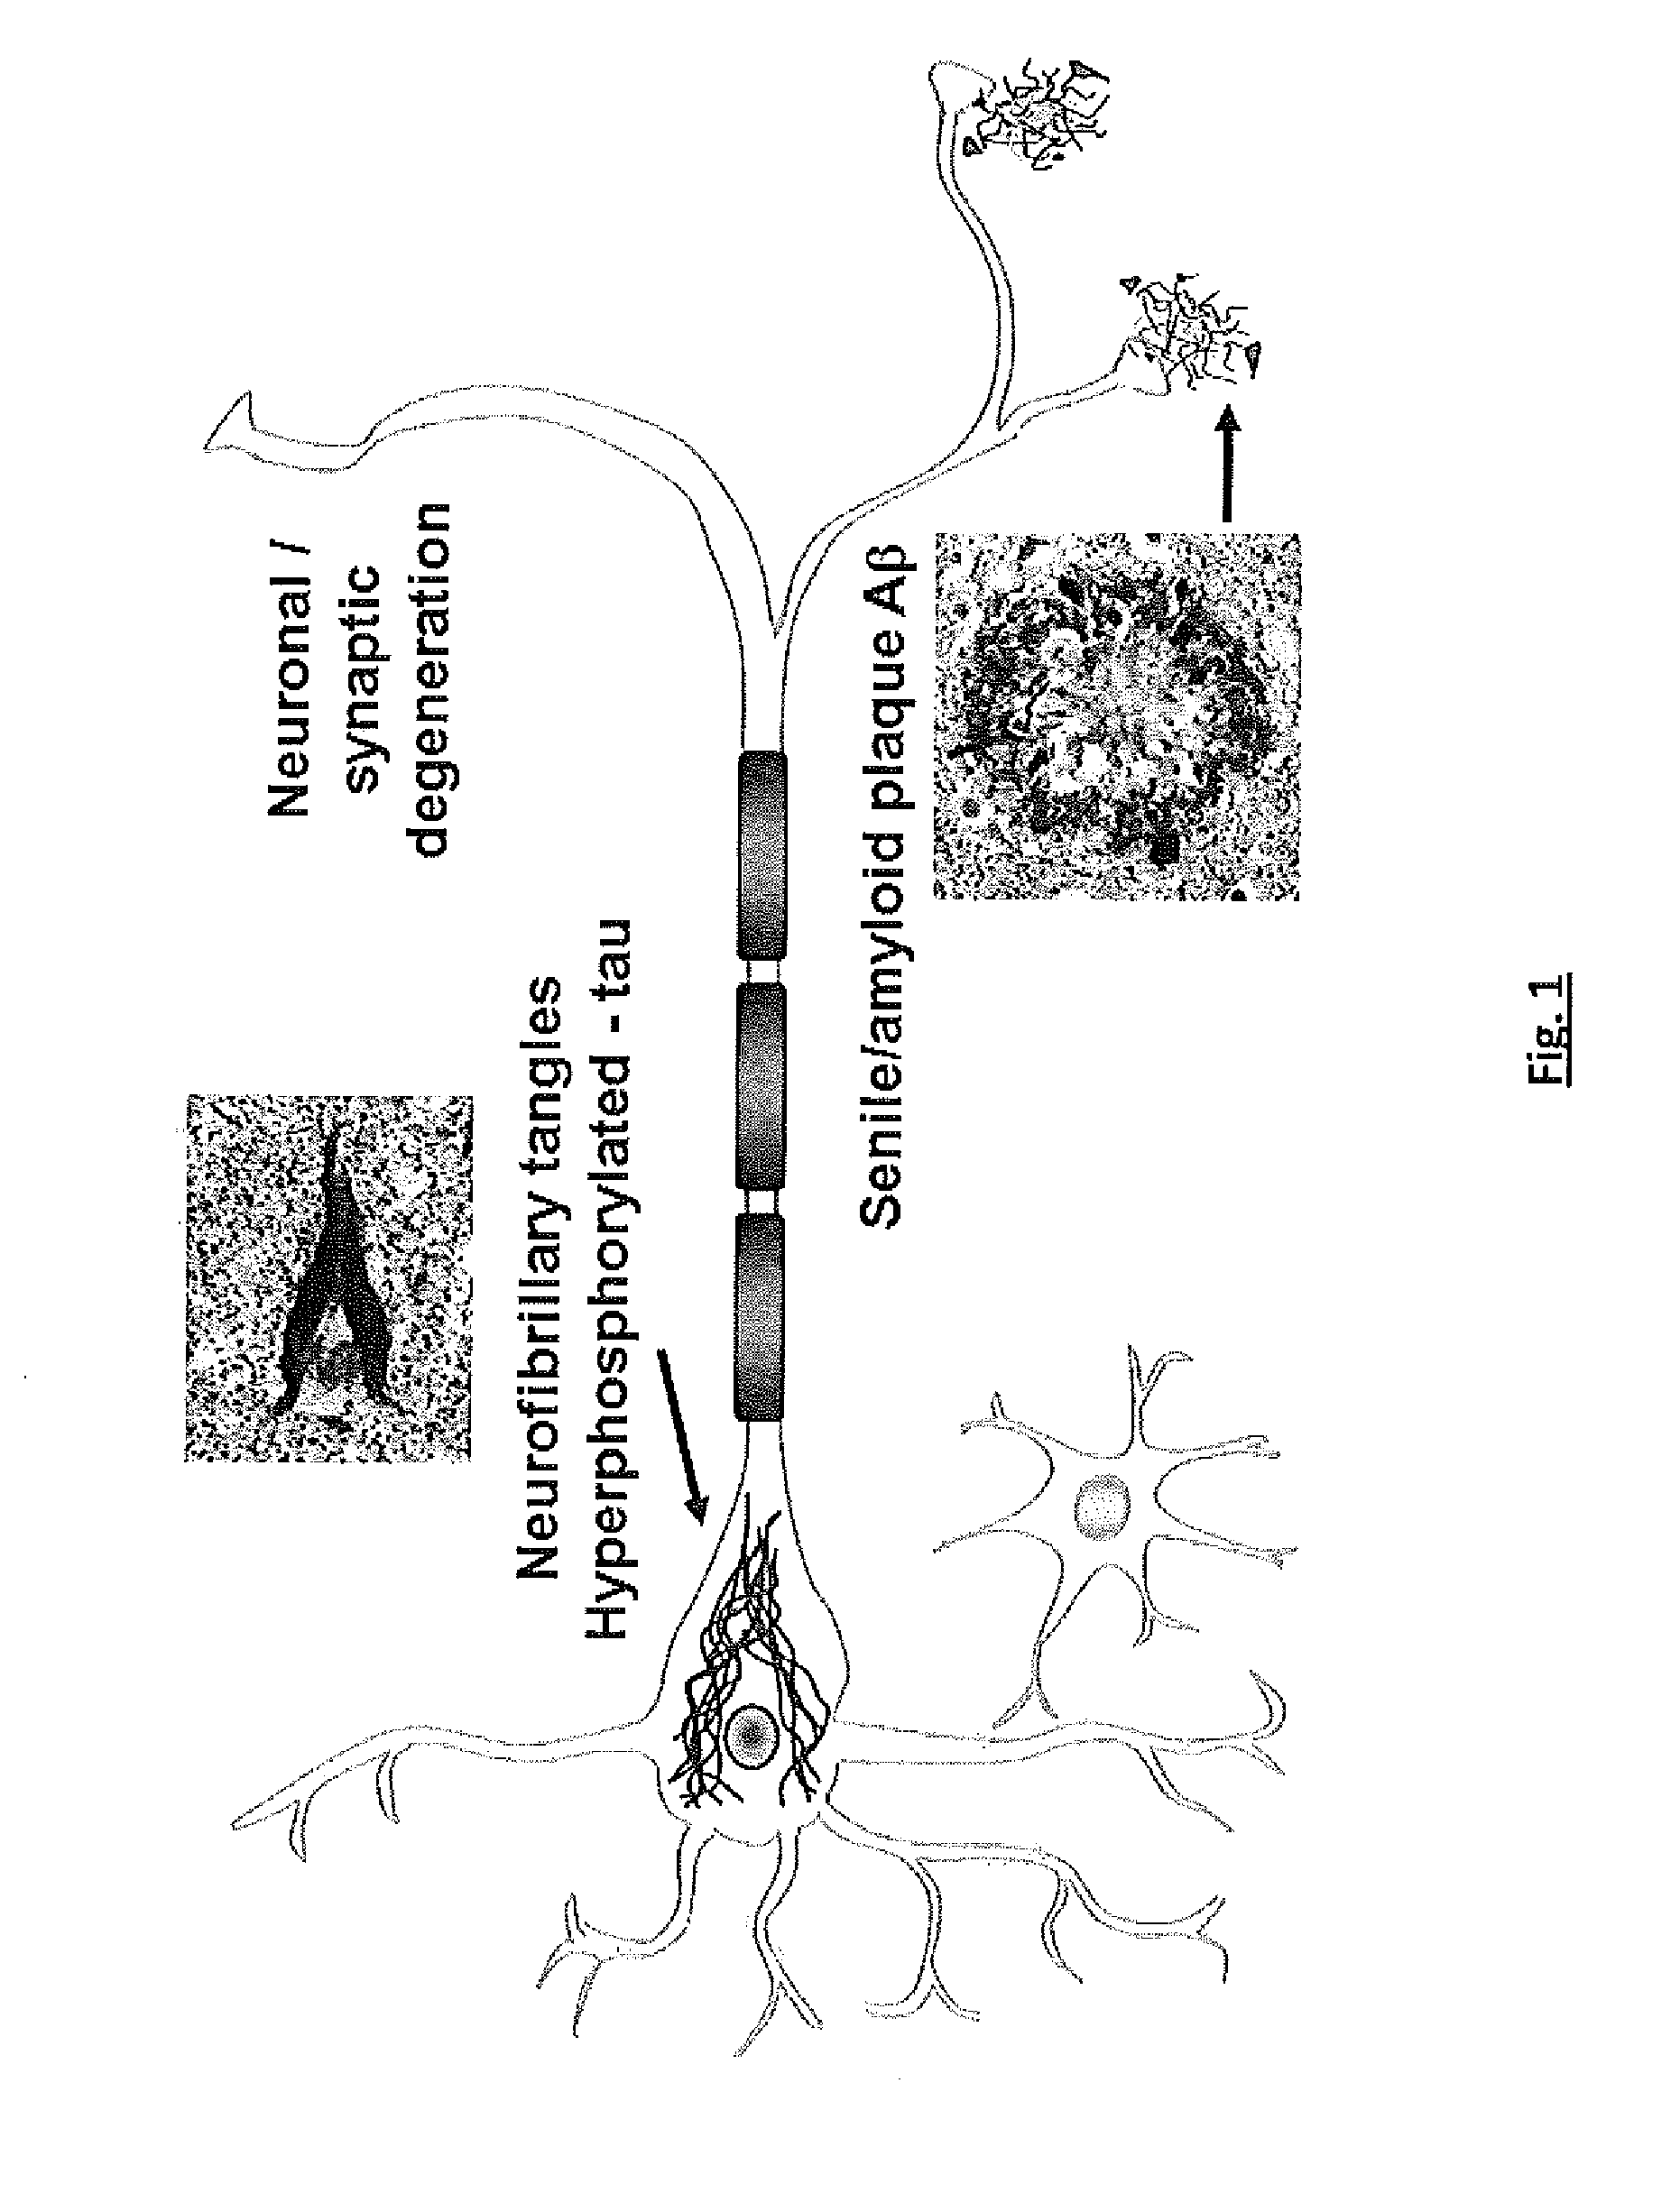 Effective Amounts of (3aR)-1,3a,8-Trimethyl-1,2,3,3a,8,8a-hexahydropyrrolo[2,3 b]indol-5-yl Phenylcarbamate and Methods of Treating or Preventing Neurodegeneration